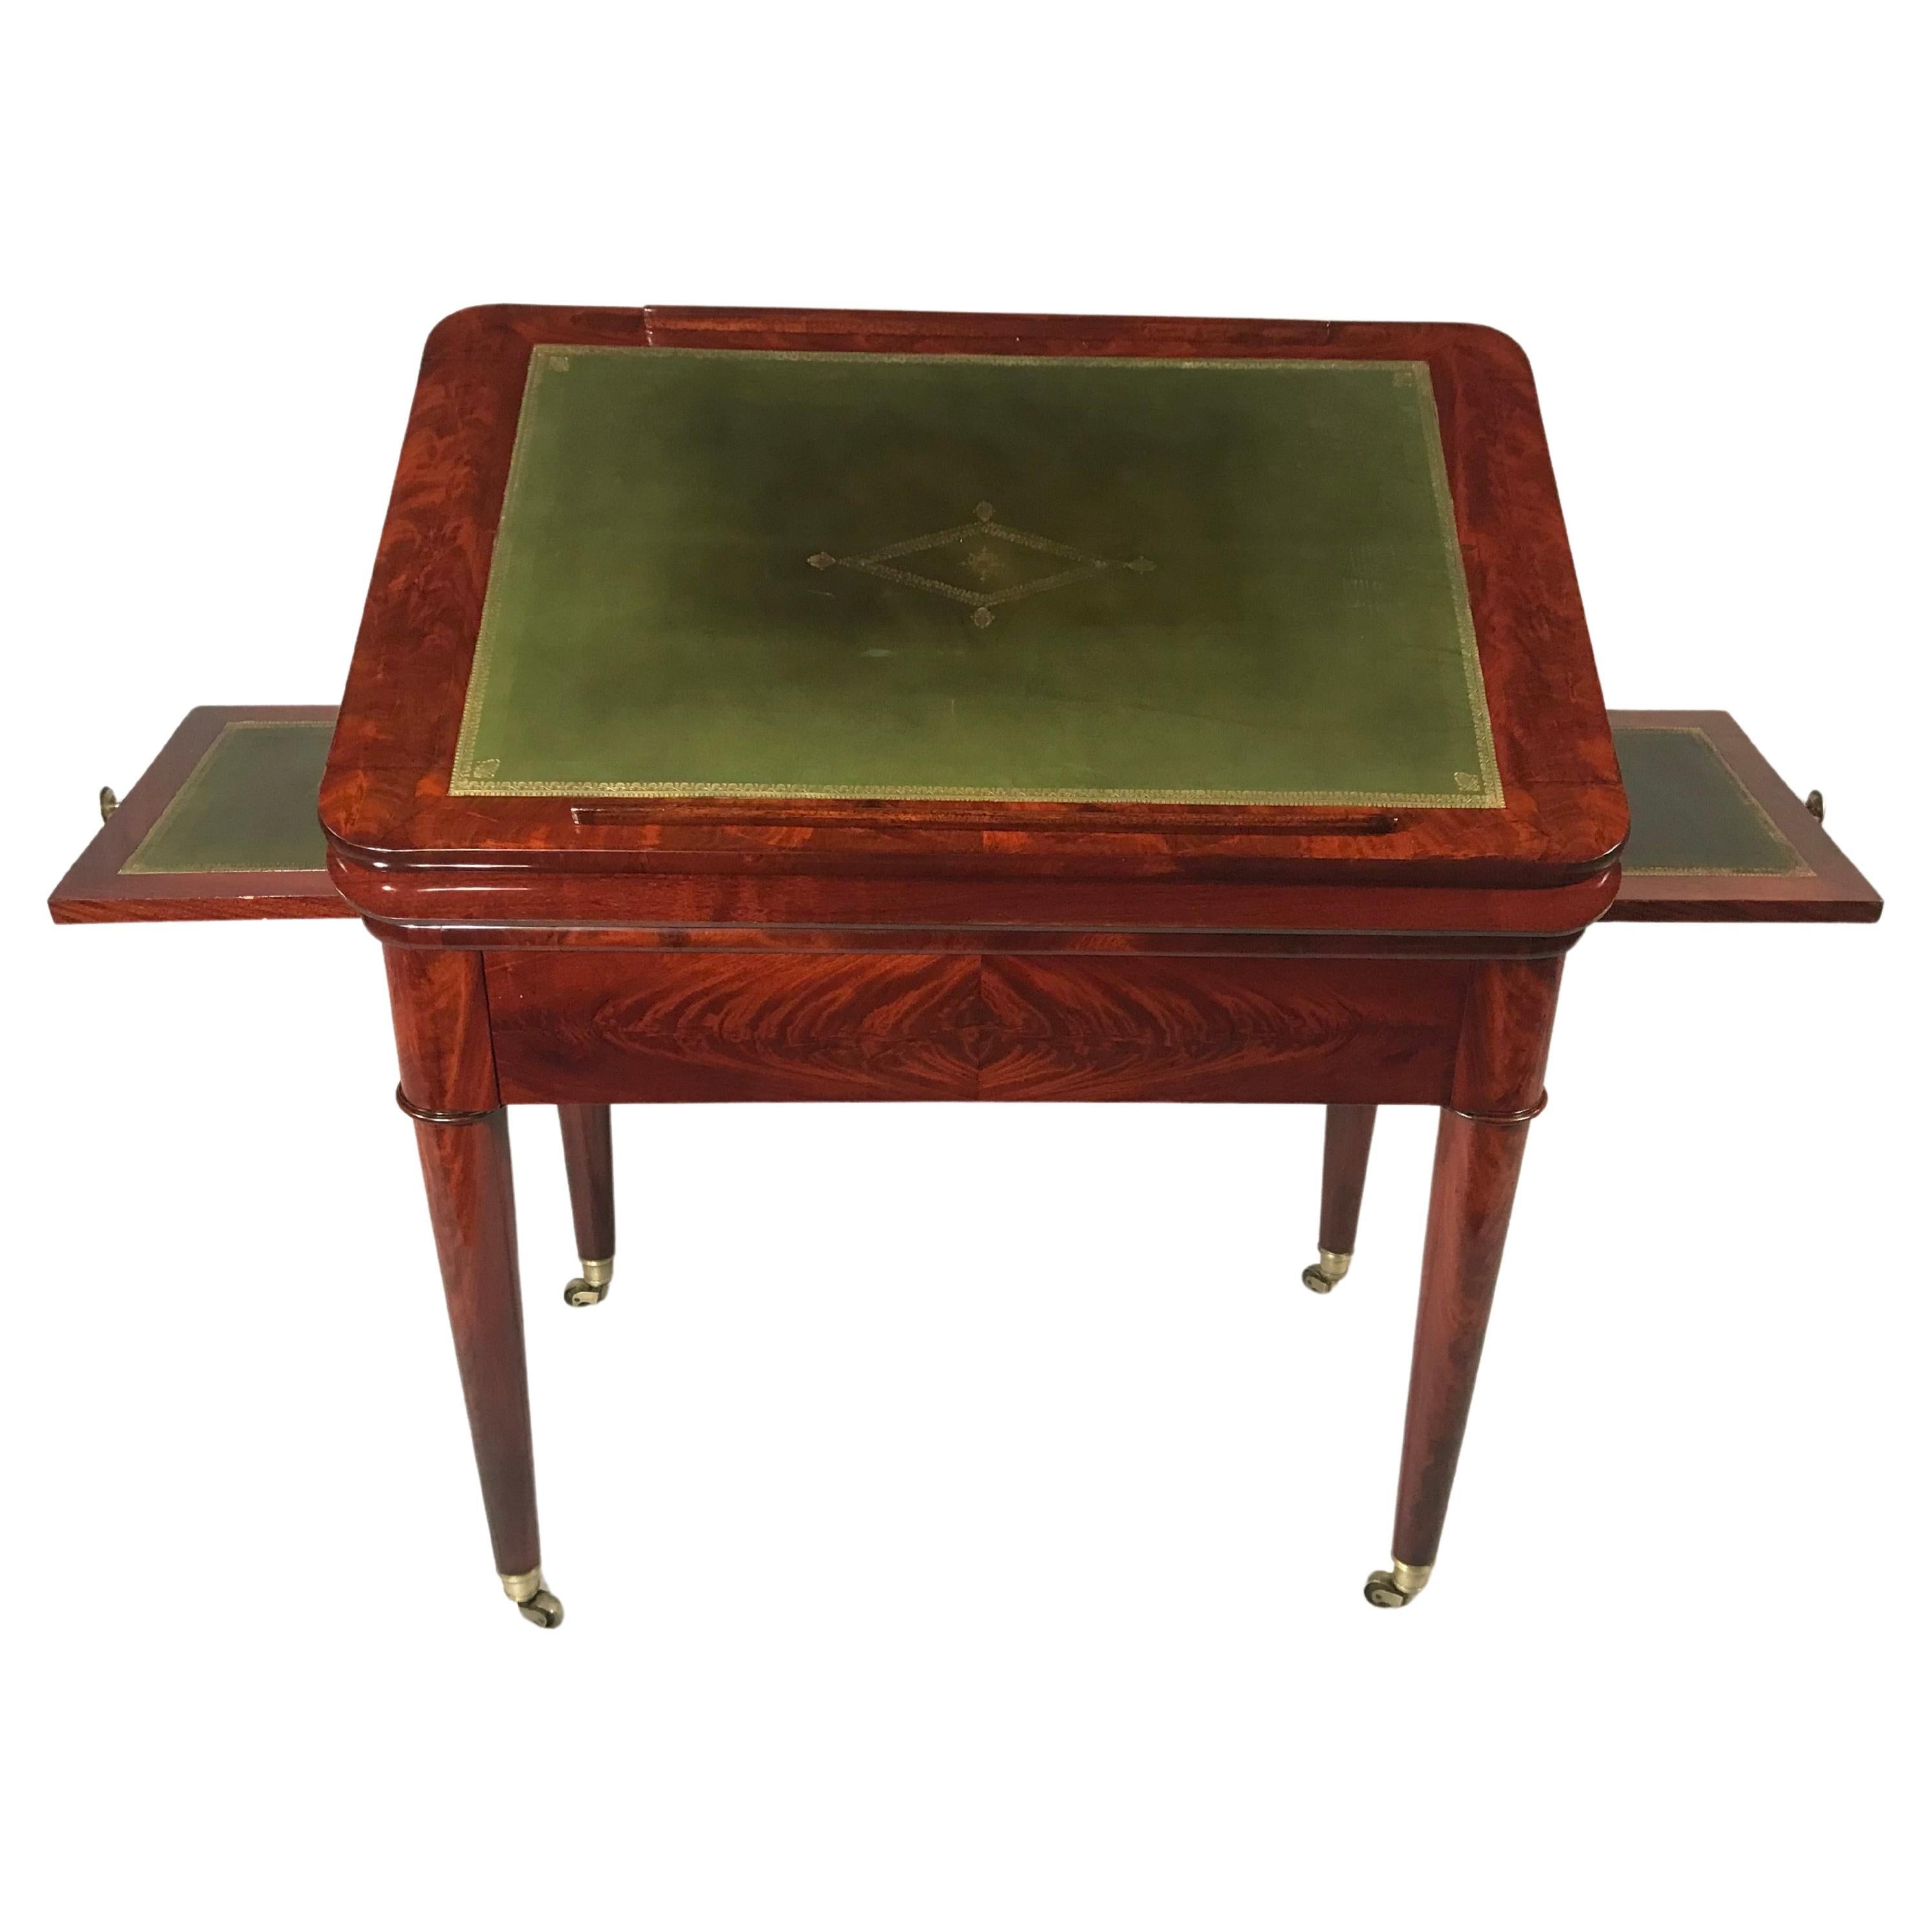 Explore a stunning late eighteenth-century Directoire Period architect’s desk crafted from figured mahogany. This exquisite piece features an adjustable green leather-lined writing surface with a hidden double rising system. Flanked by a pair of